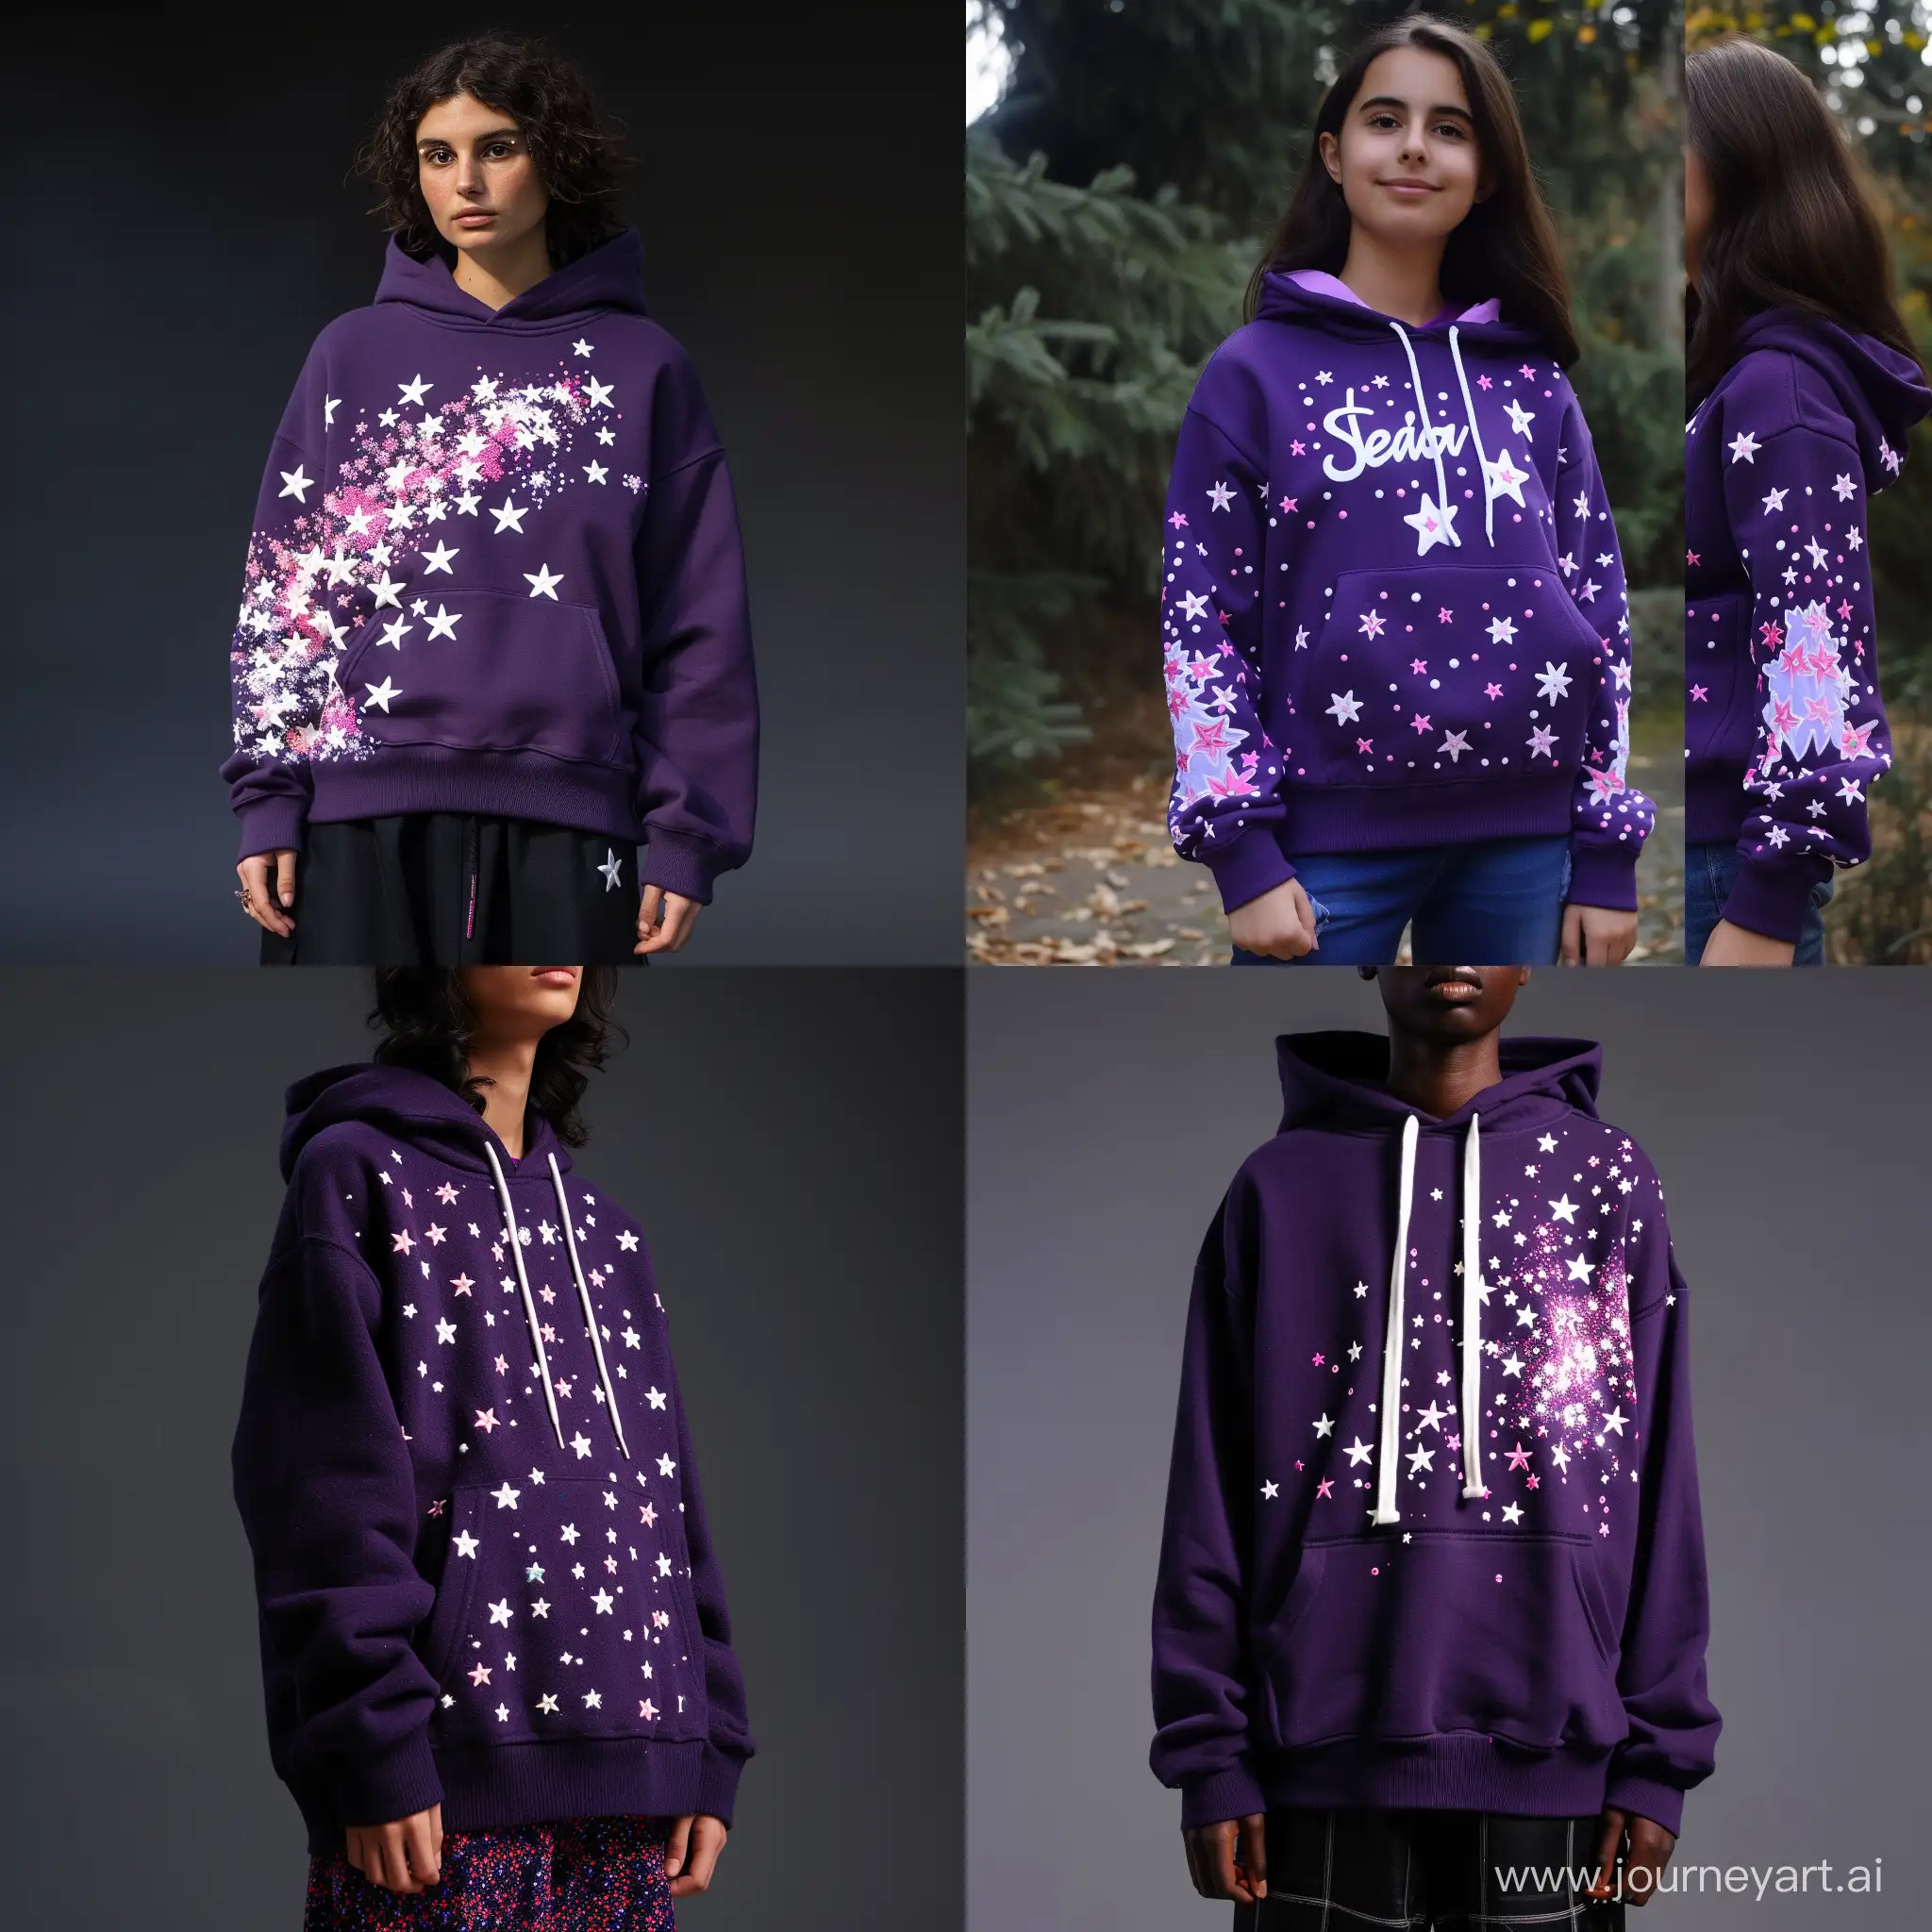 Fashionable-Purple-Hoodie-with-White-and-Pink-Stars-and-Embroidered-Lettering